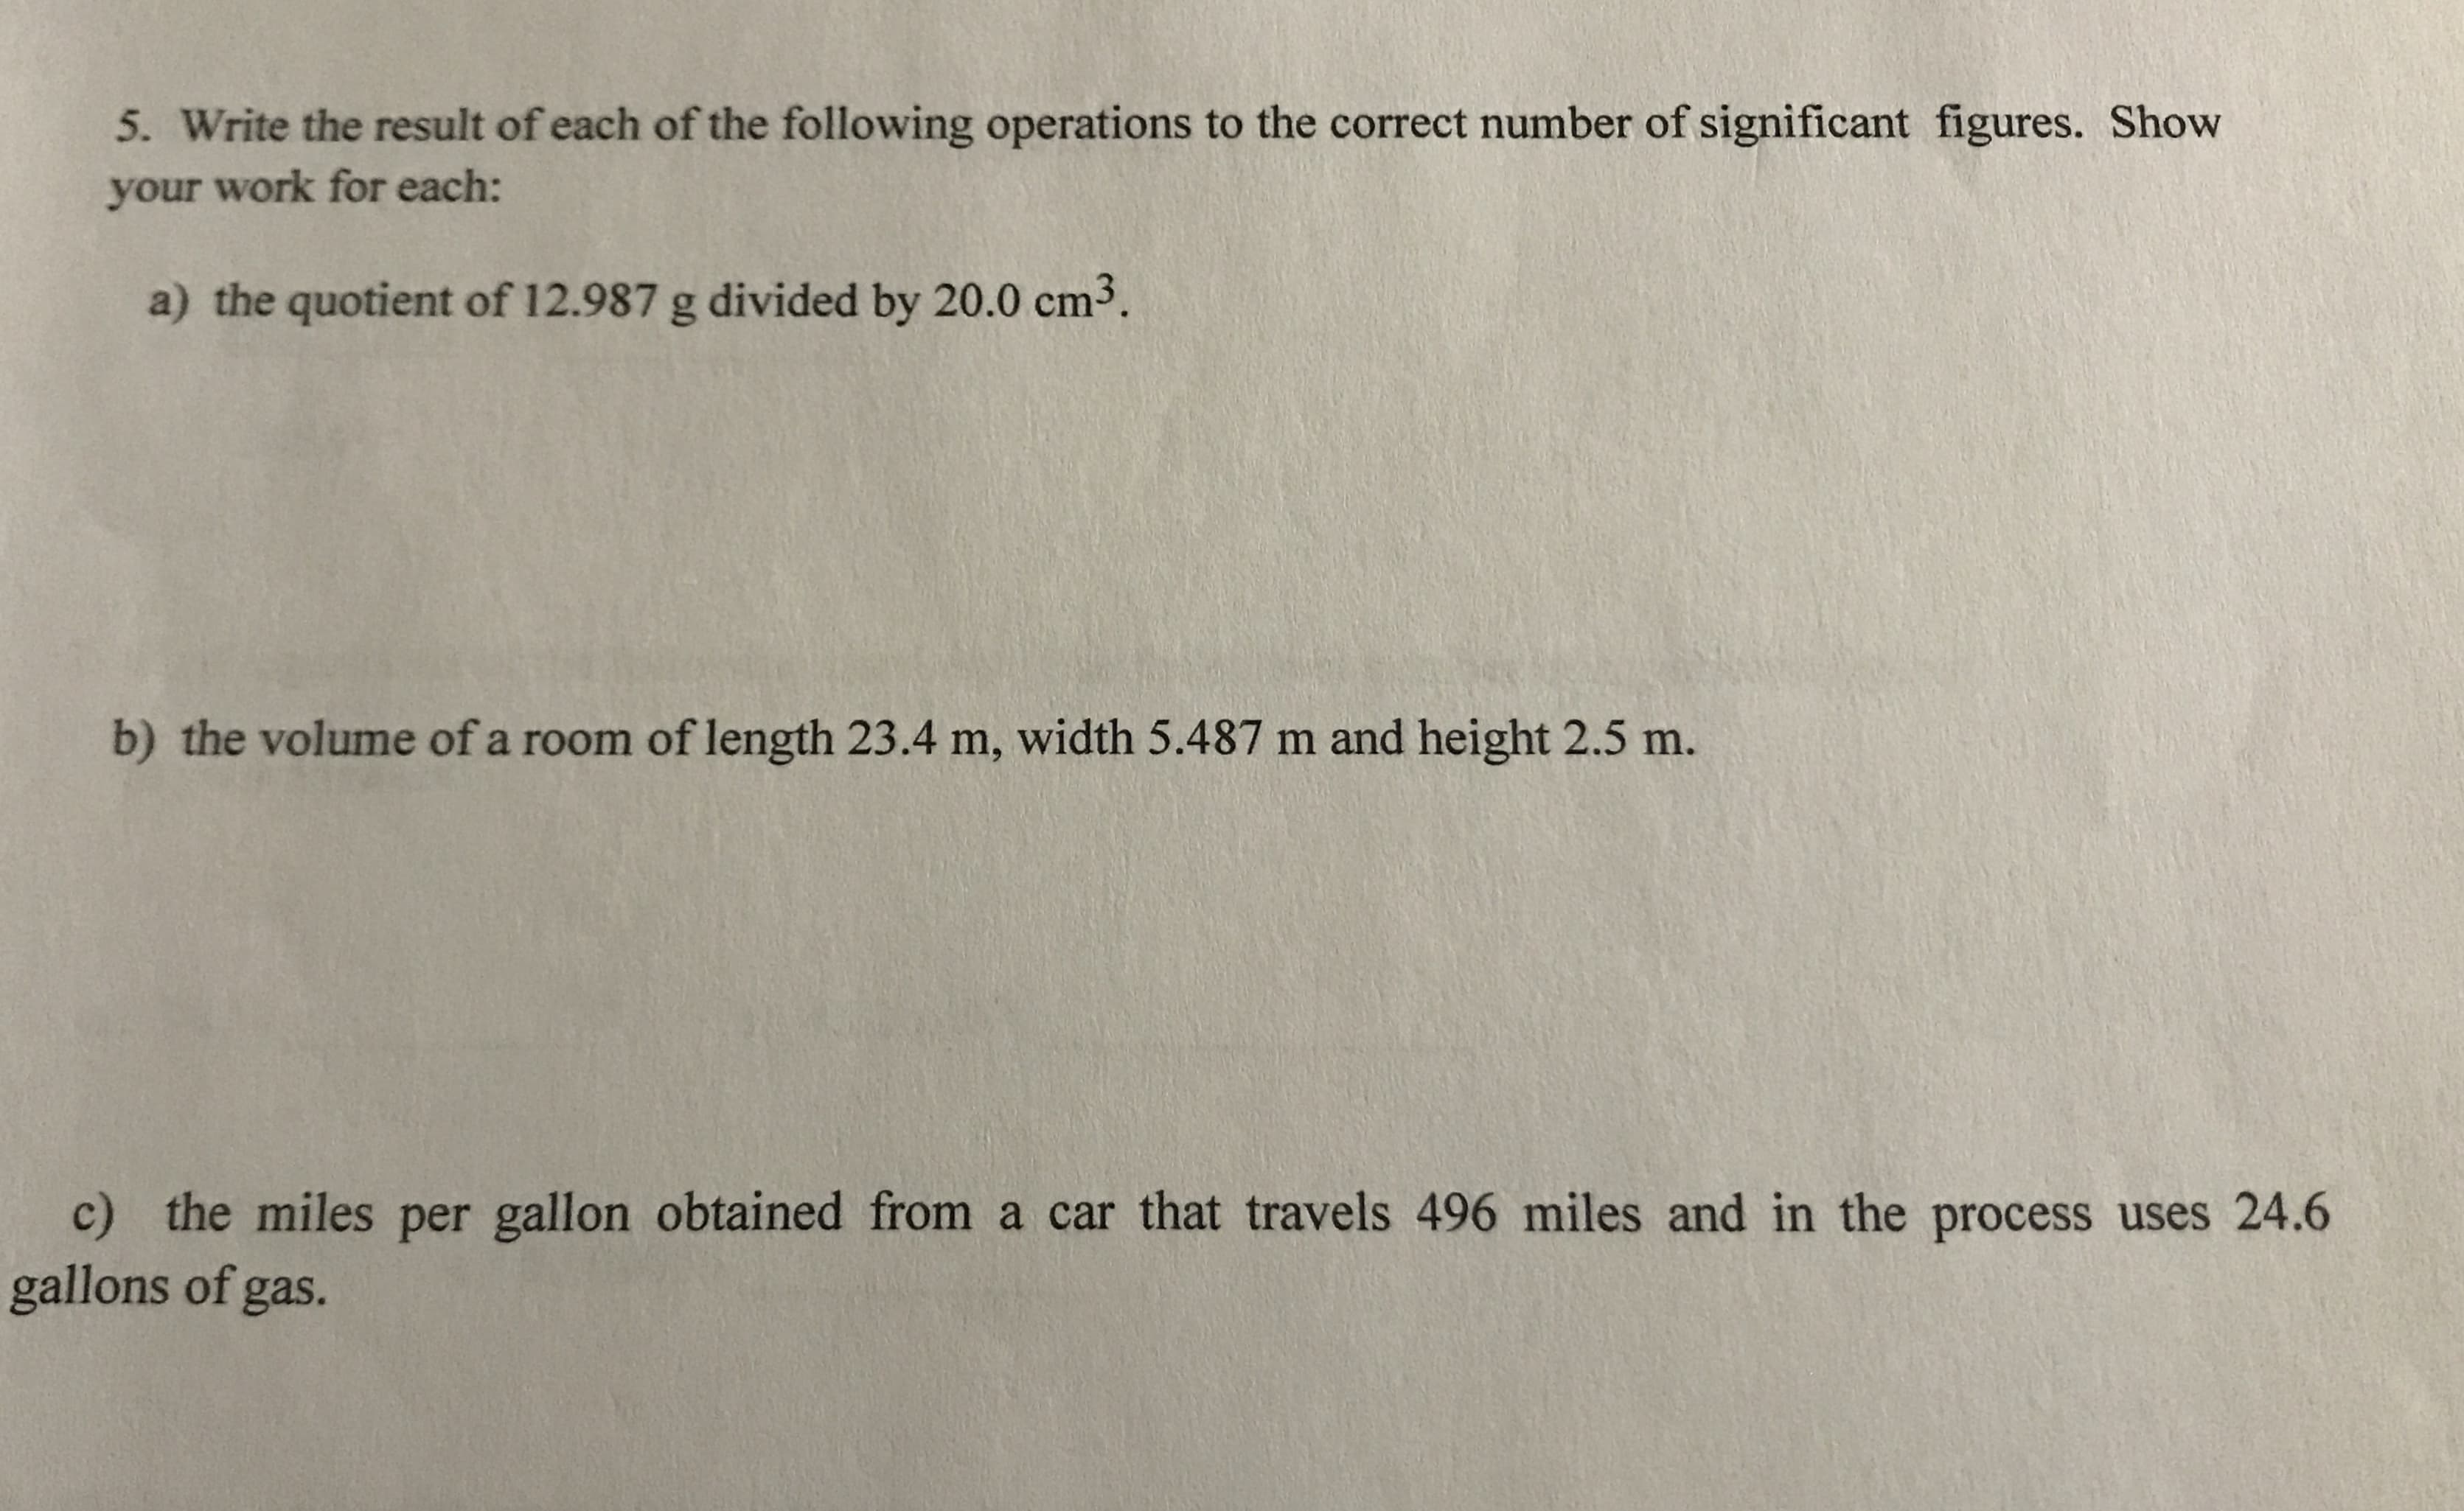 5. Write the result of each of the following operations to the correct number of significant figures. Show
your work for each:
a) the quotient of 12.987 g divided by 20.0 cm3.
b) the volume of a room of length 23.4 m, width 5.487 m and height 2.5 m.
c) the miles per gallon obtained from a car that travels 496 miles and in the process uses 24.6
gallons of gas.
